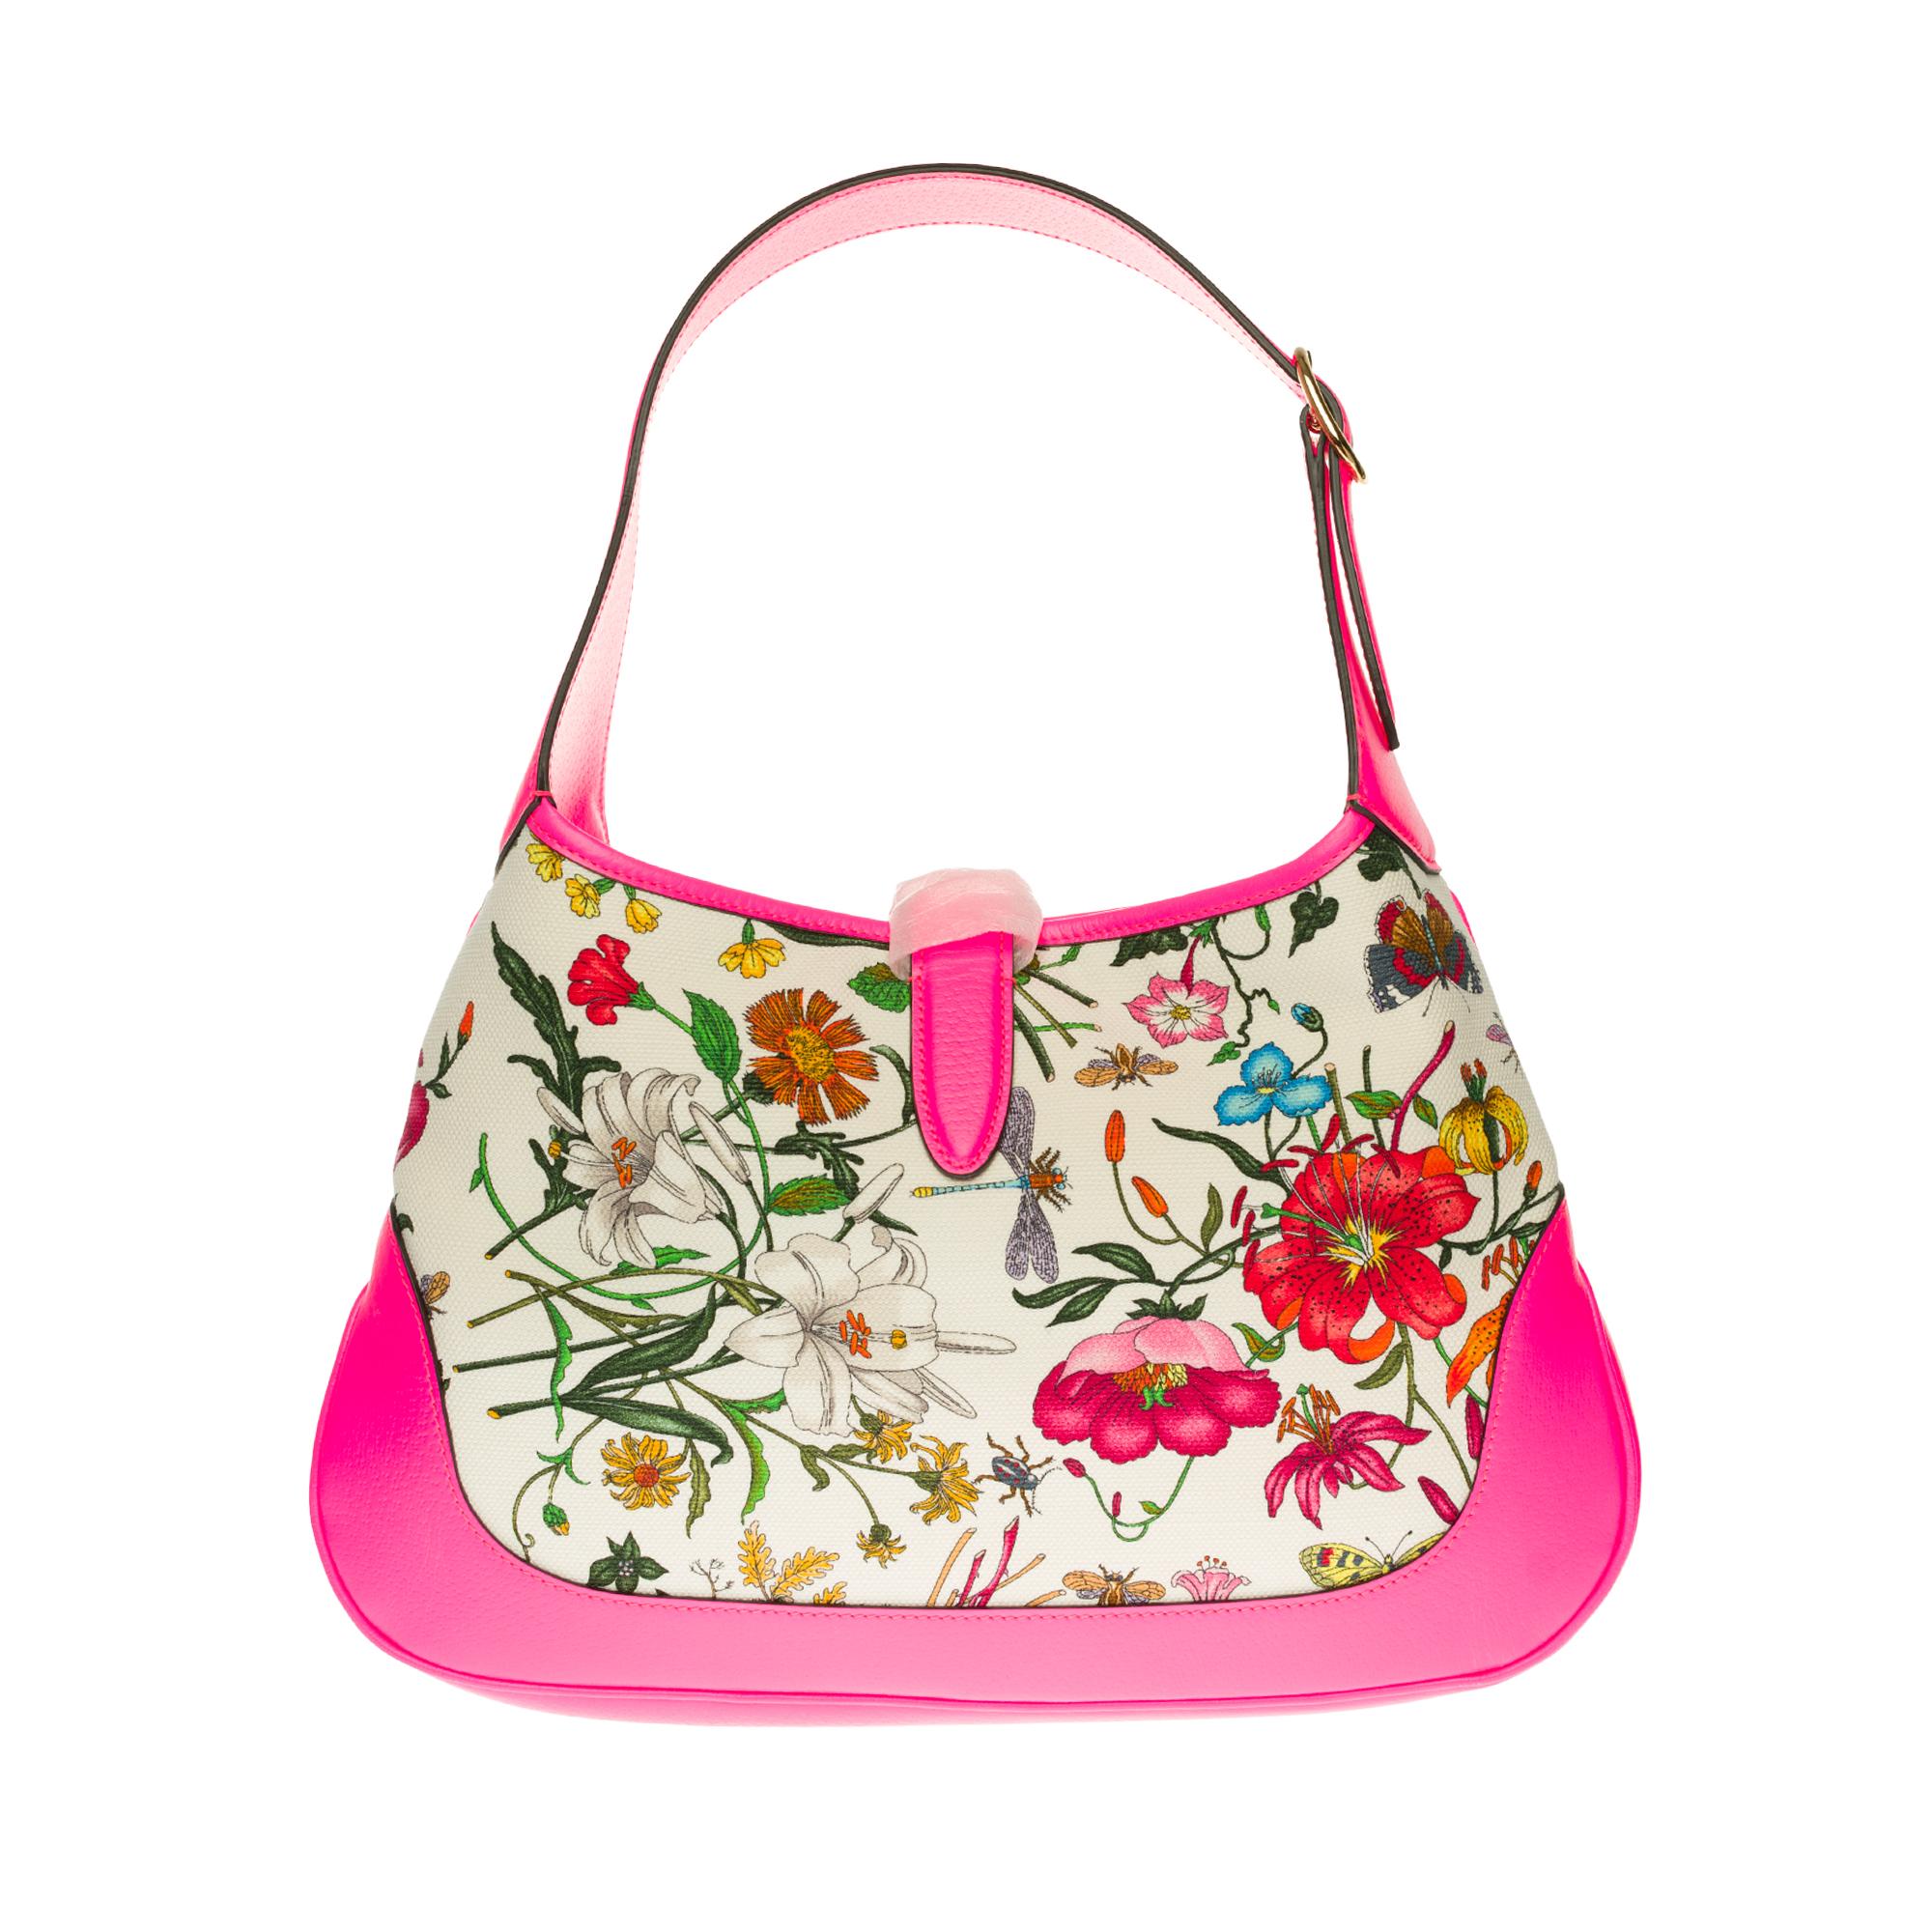 Gucci Jackie Flora Bag

Floral shoulder bag with adjustable shoulder strap, leather hardware and floral print.
Colour: Pink.
Manufacture: Italy
Composition
Exterior: 100% canvas, 100% leather
Lining: 100% Cotton, 100% Linen

Actions:
Width 33,5